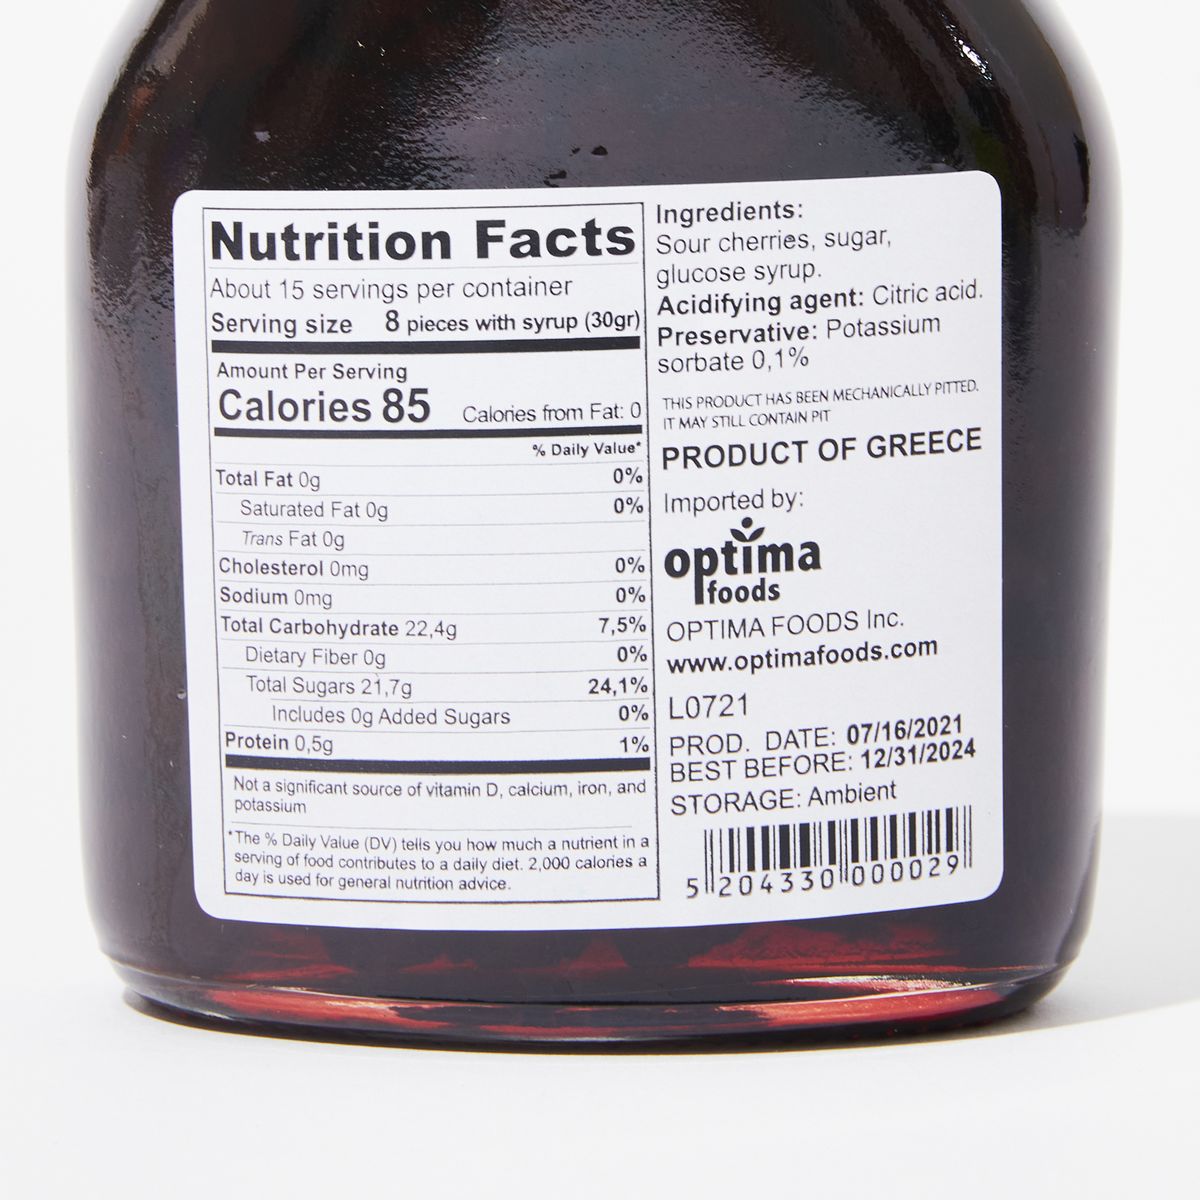 Nutrition Facts, Ingredients: Sour Cherries, Sugar, Glucose Syrup, Citric Acid, Potassium Sorbate